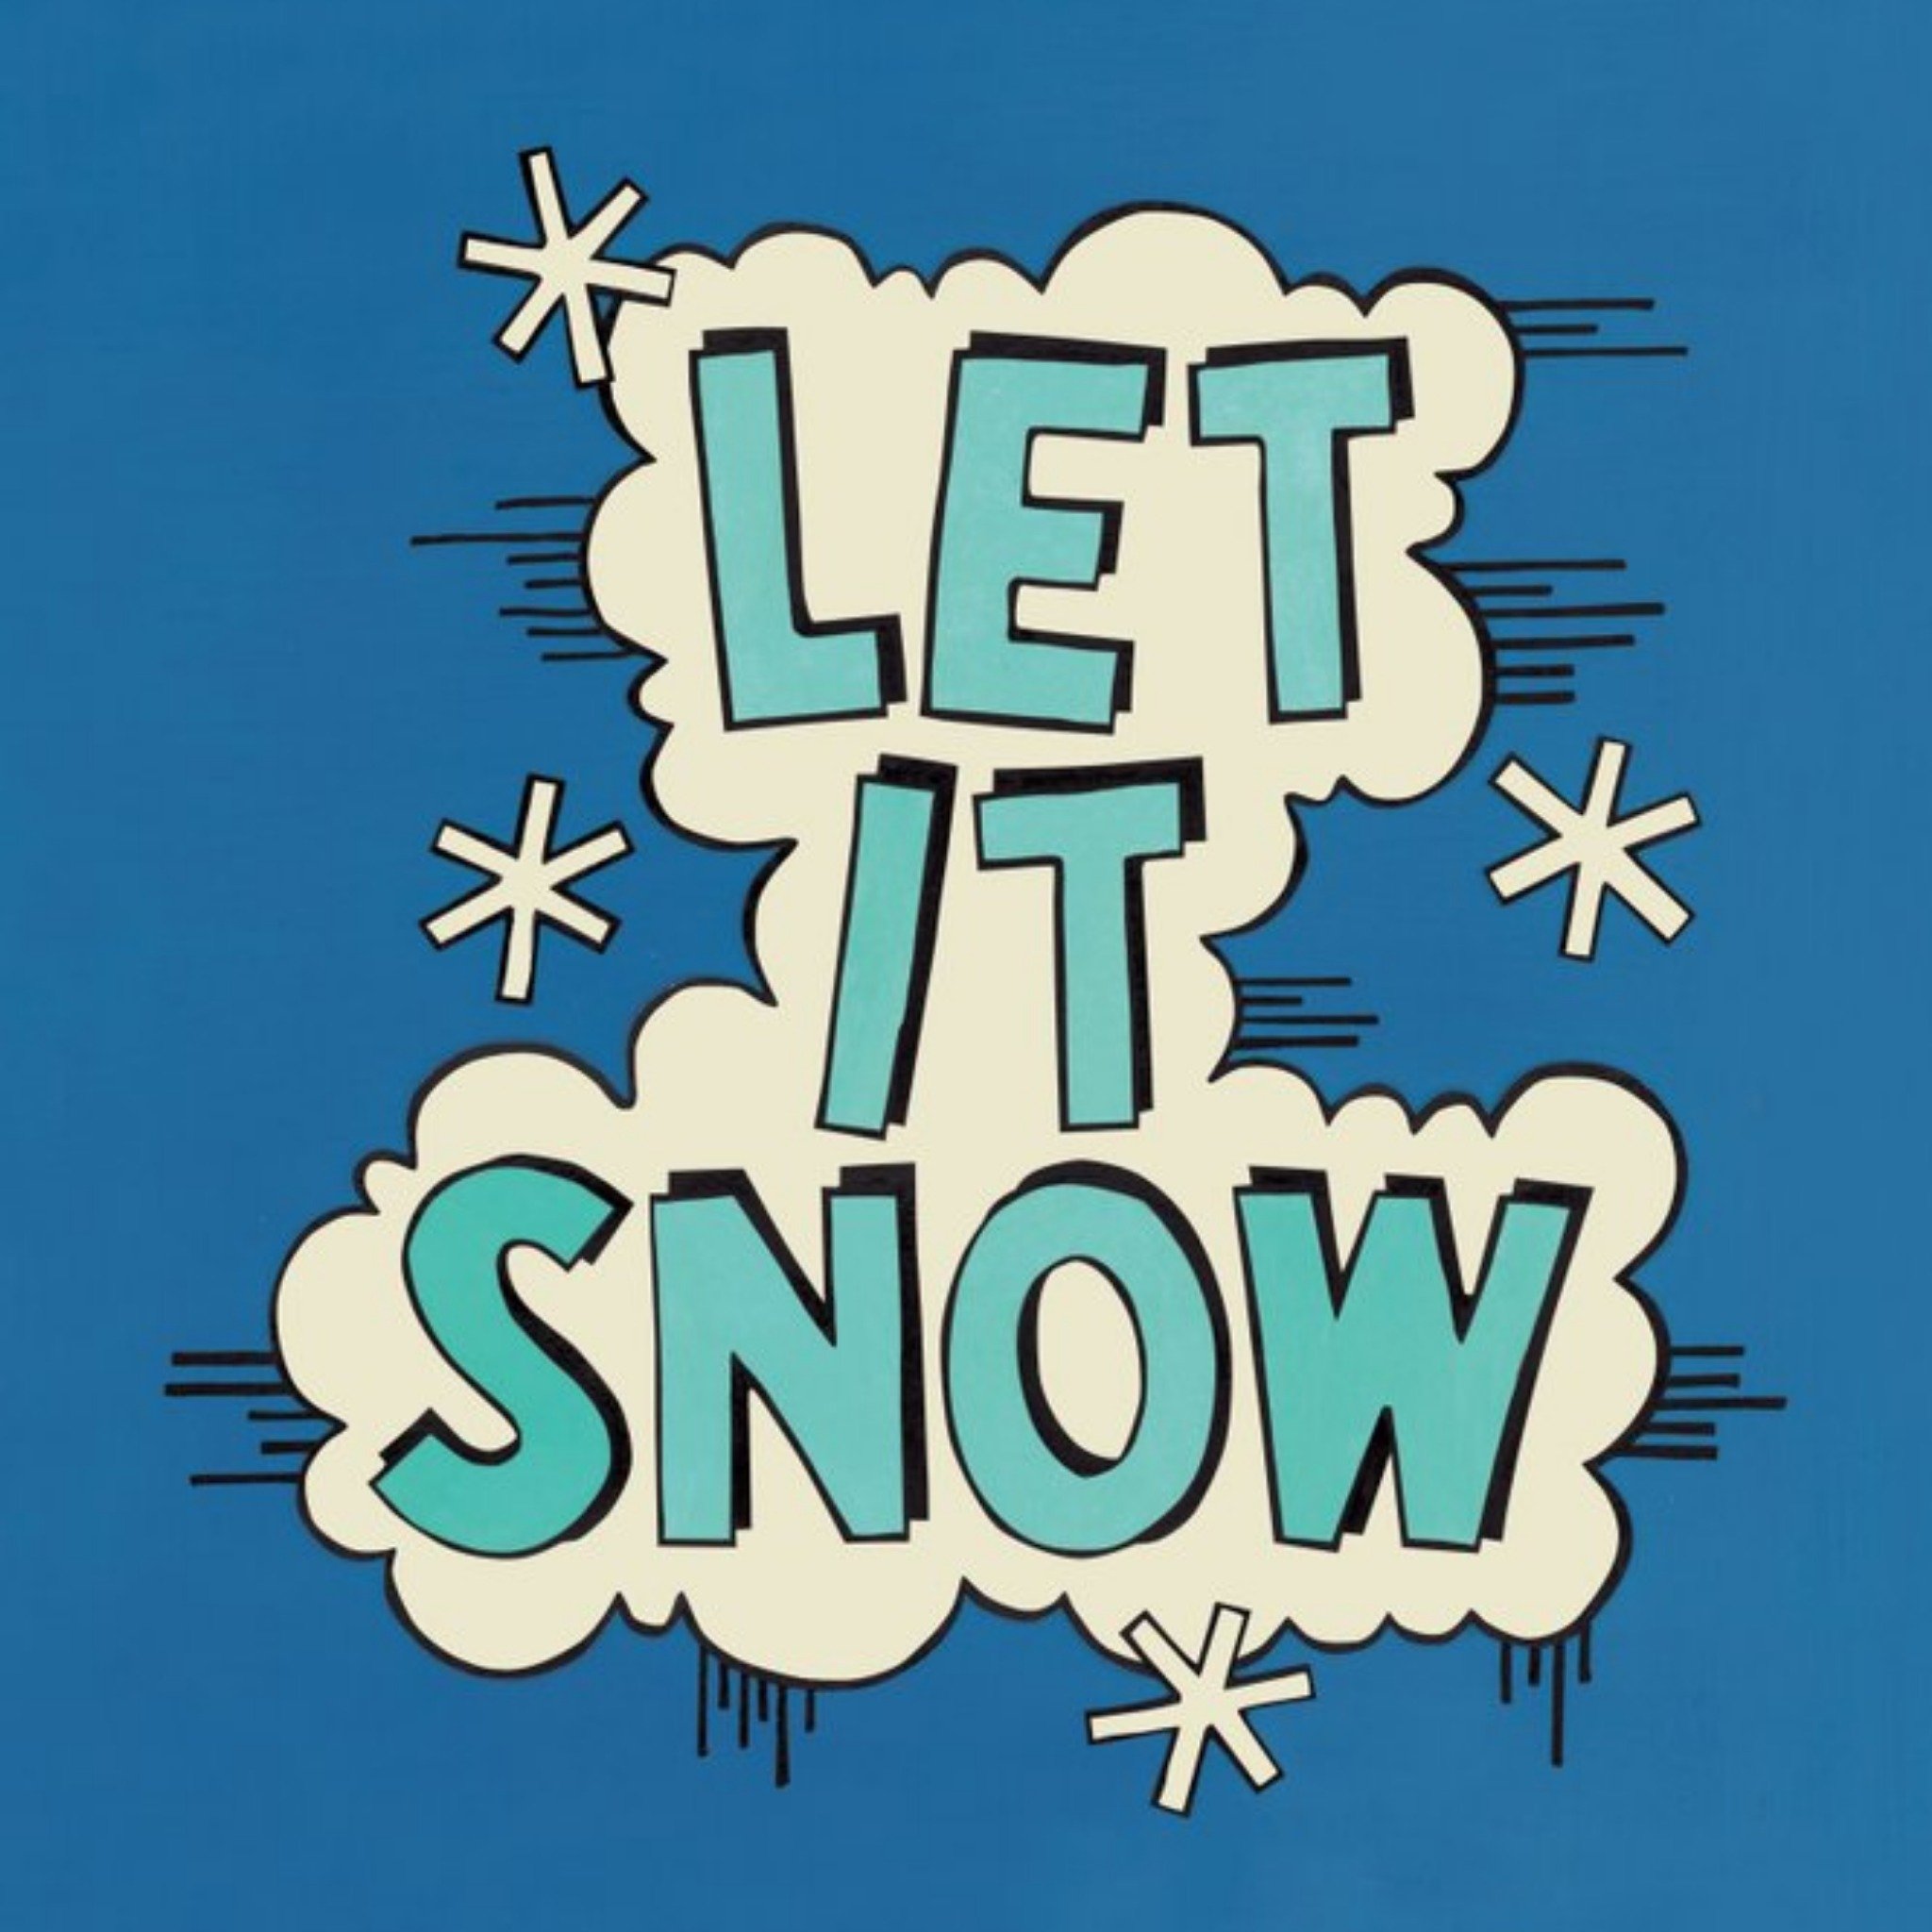 Moonpig Comic Book Style Let It Snow Christmas Card, Square